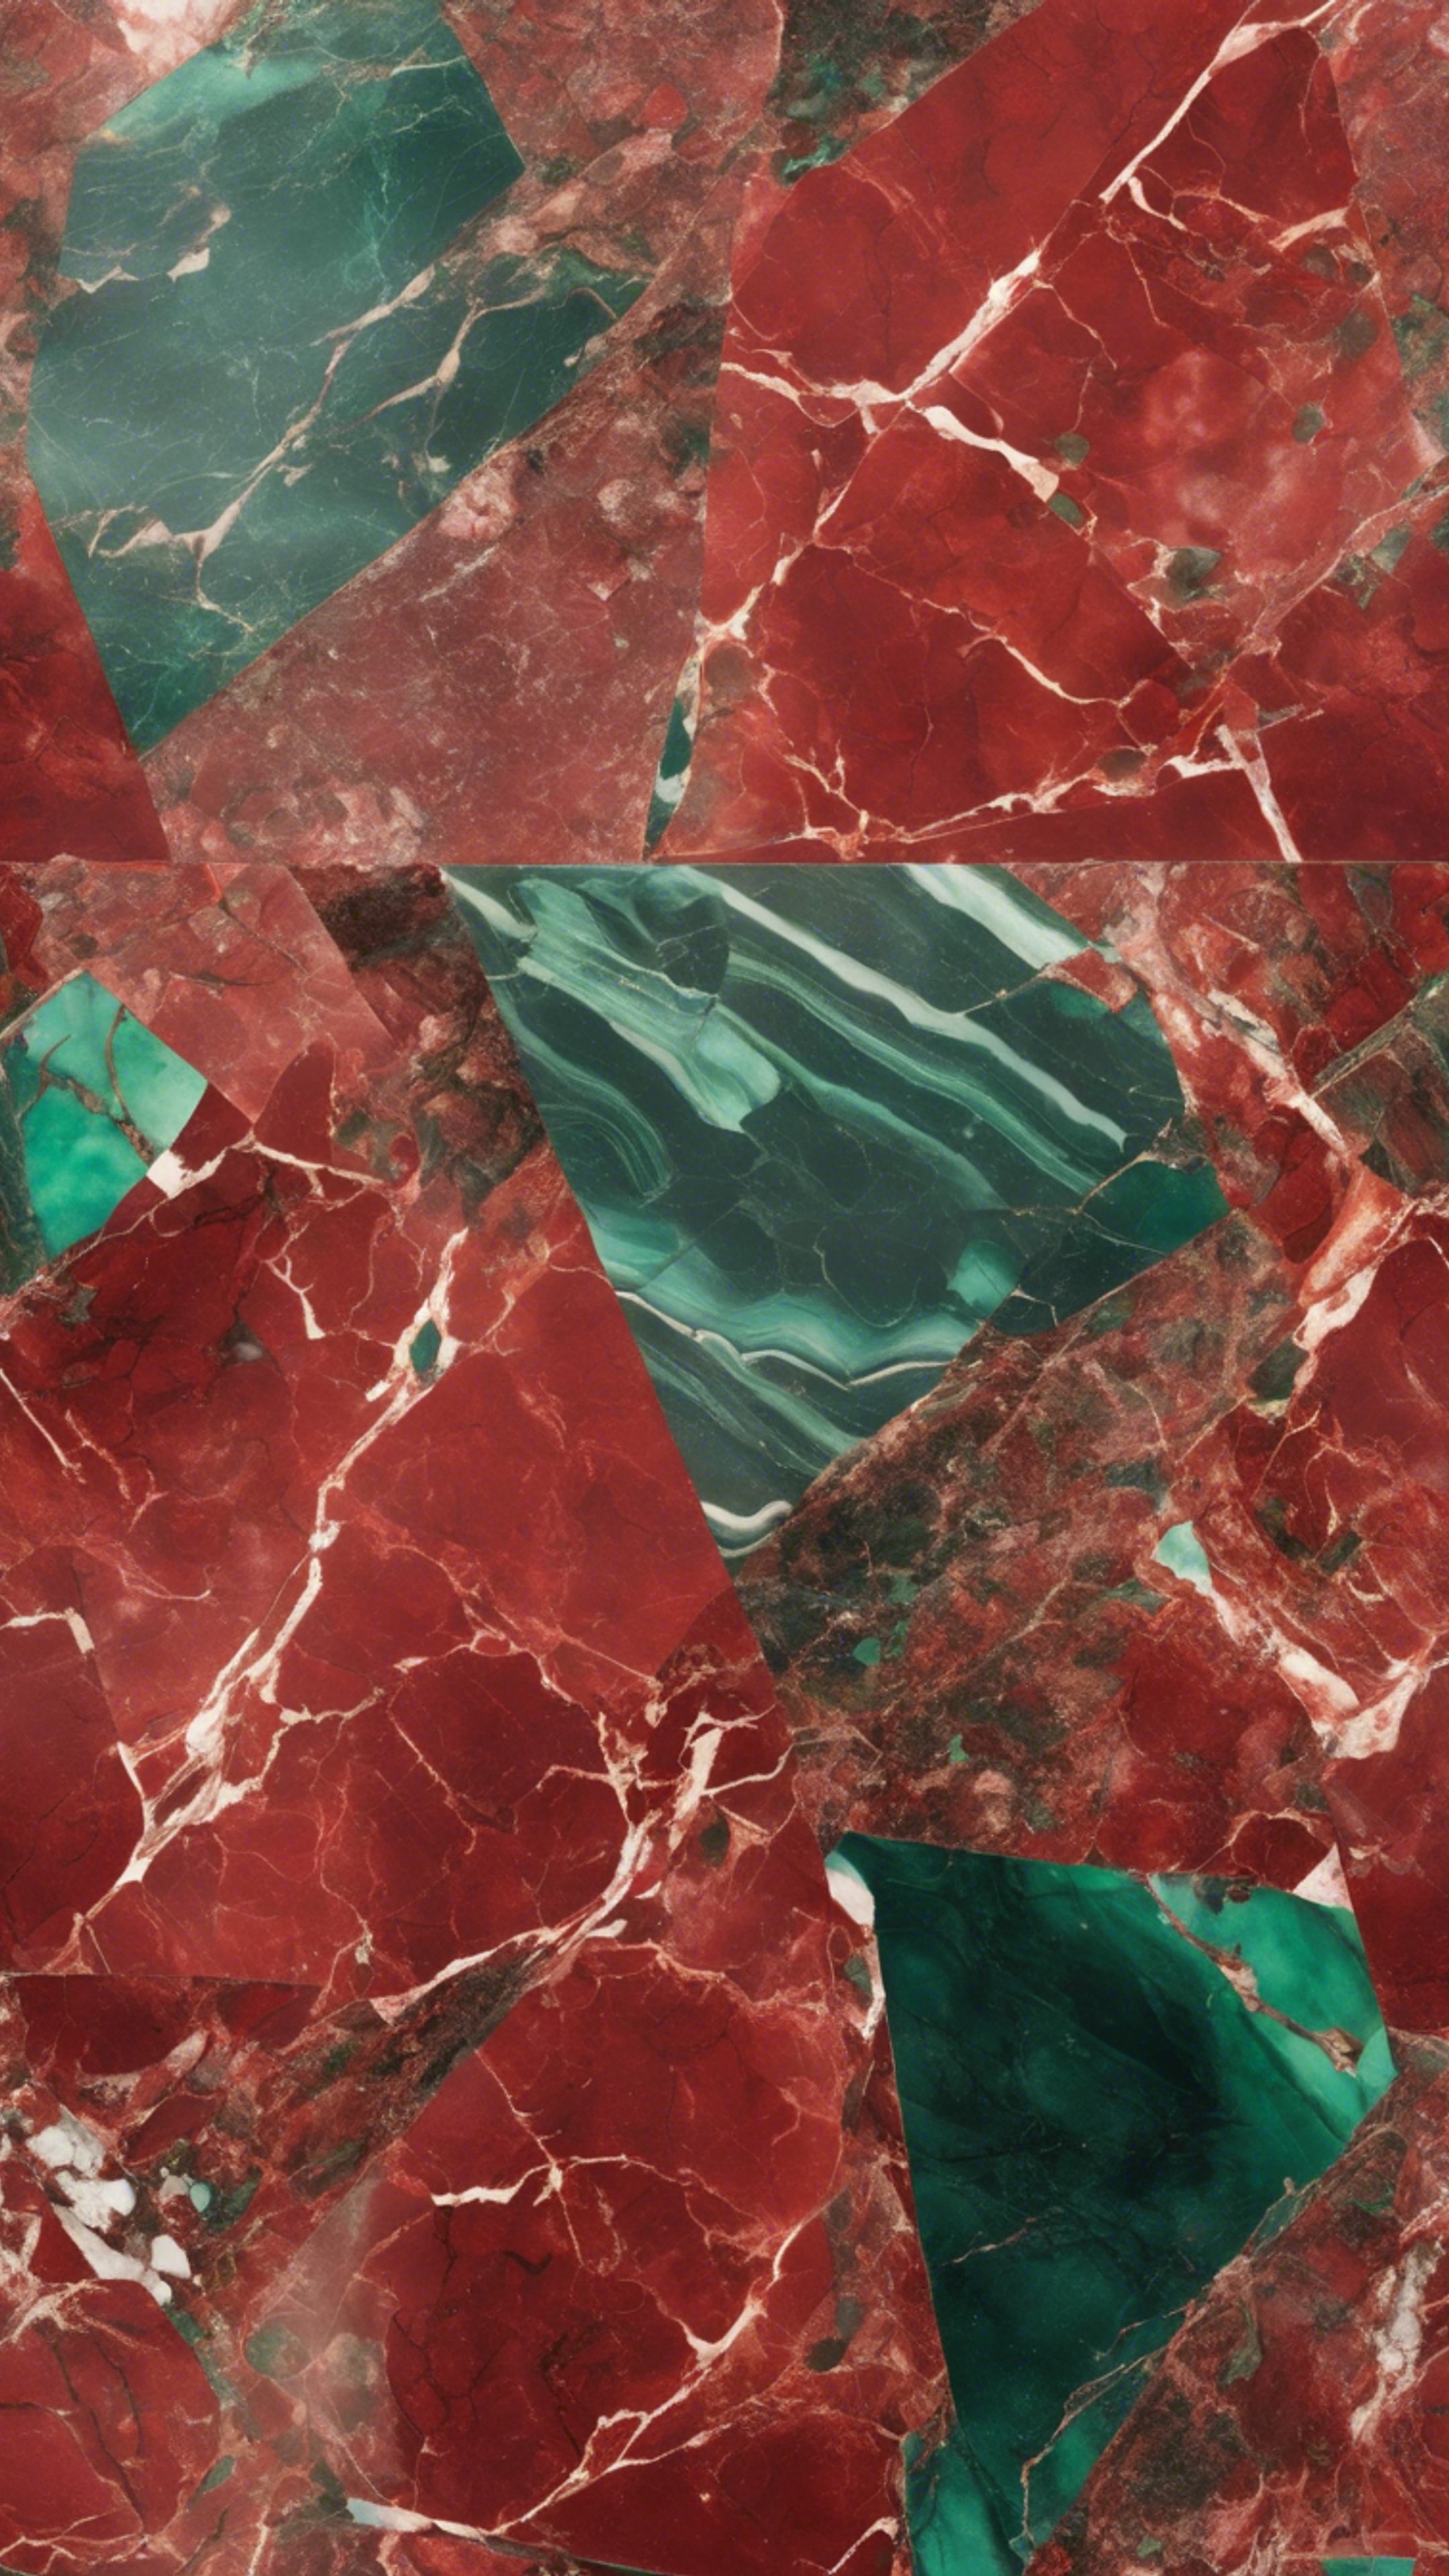 Artistic red and green marble pattern showing rich textures. Tapeta[98bc637281684a3dba4a]